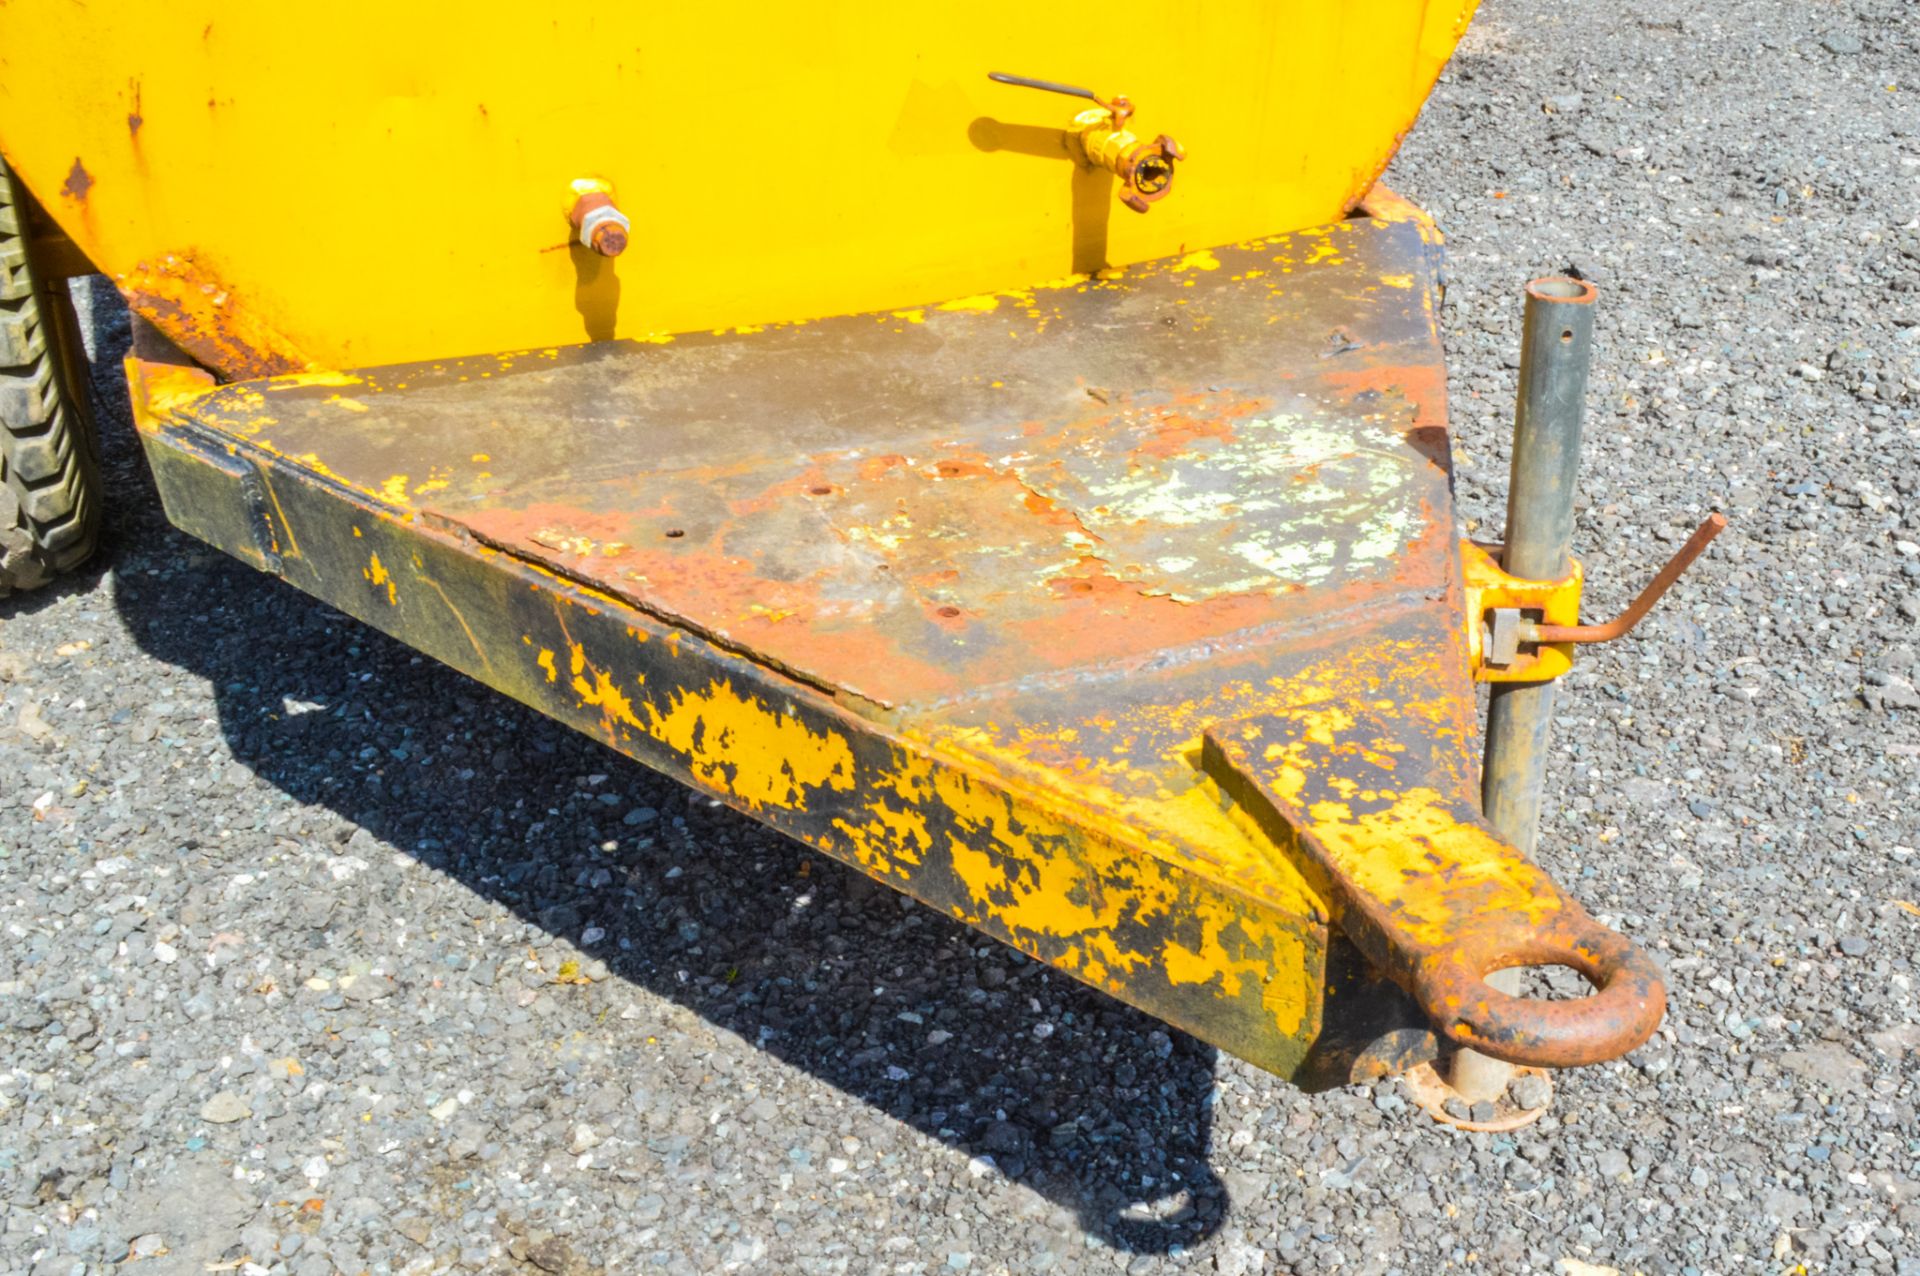 500 gallon site tow water bowser - Image 2 of 2